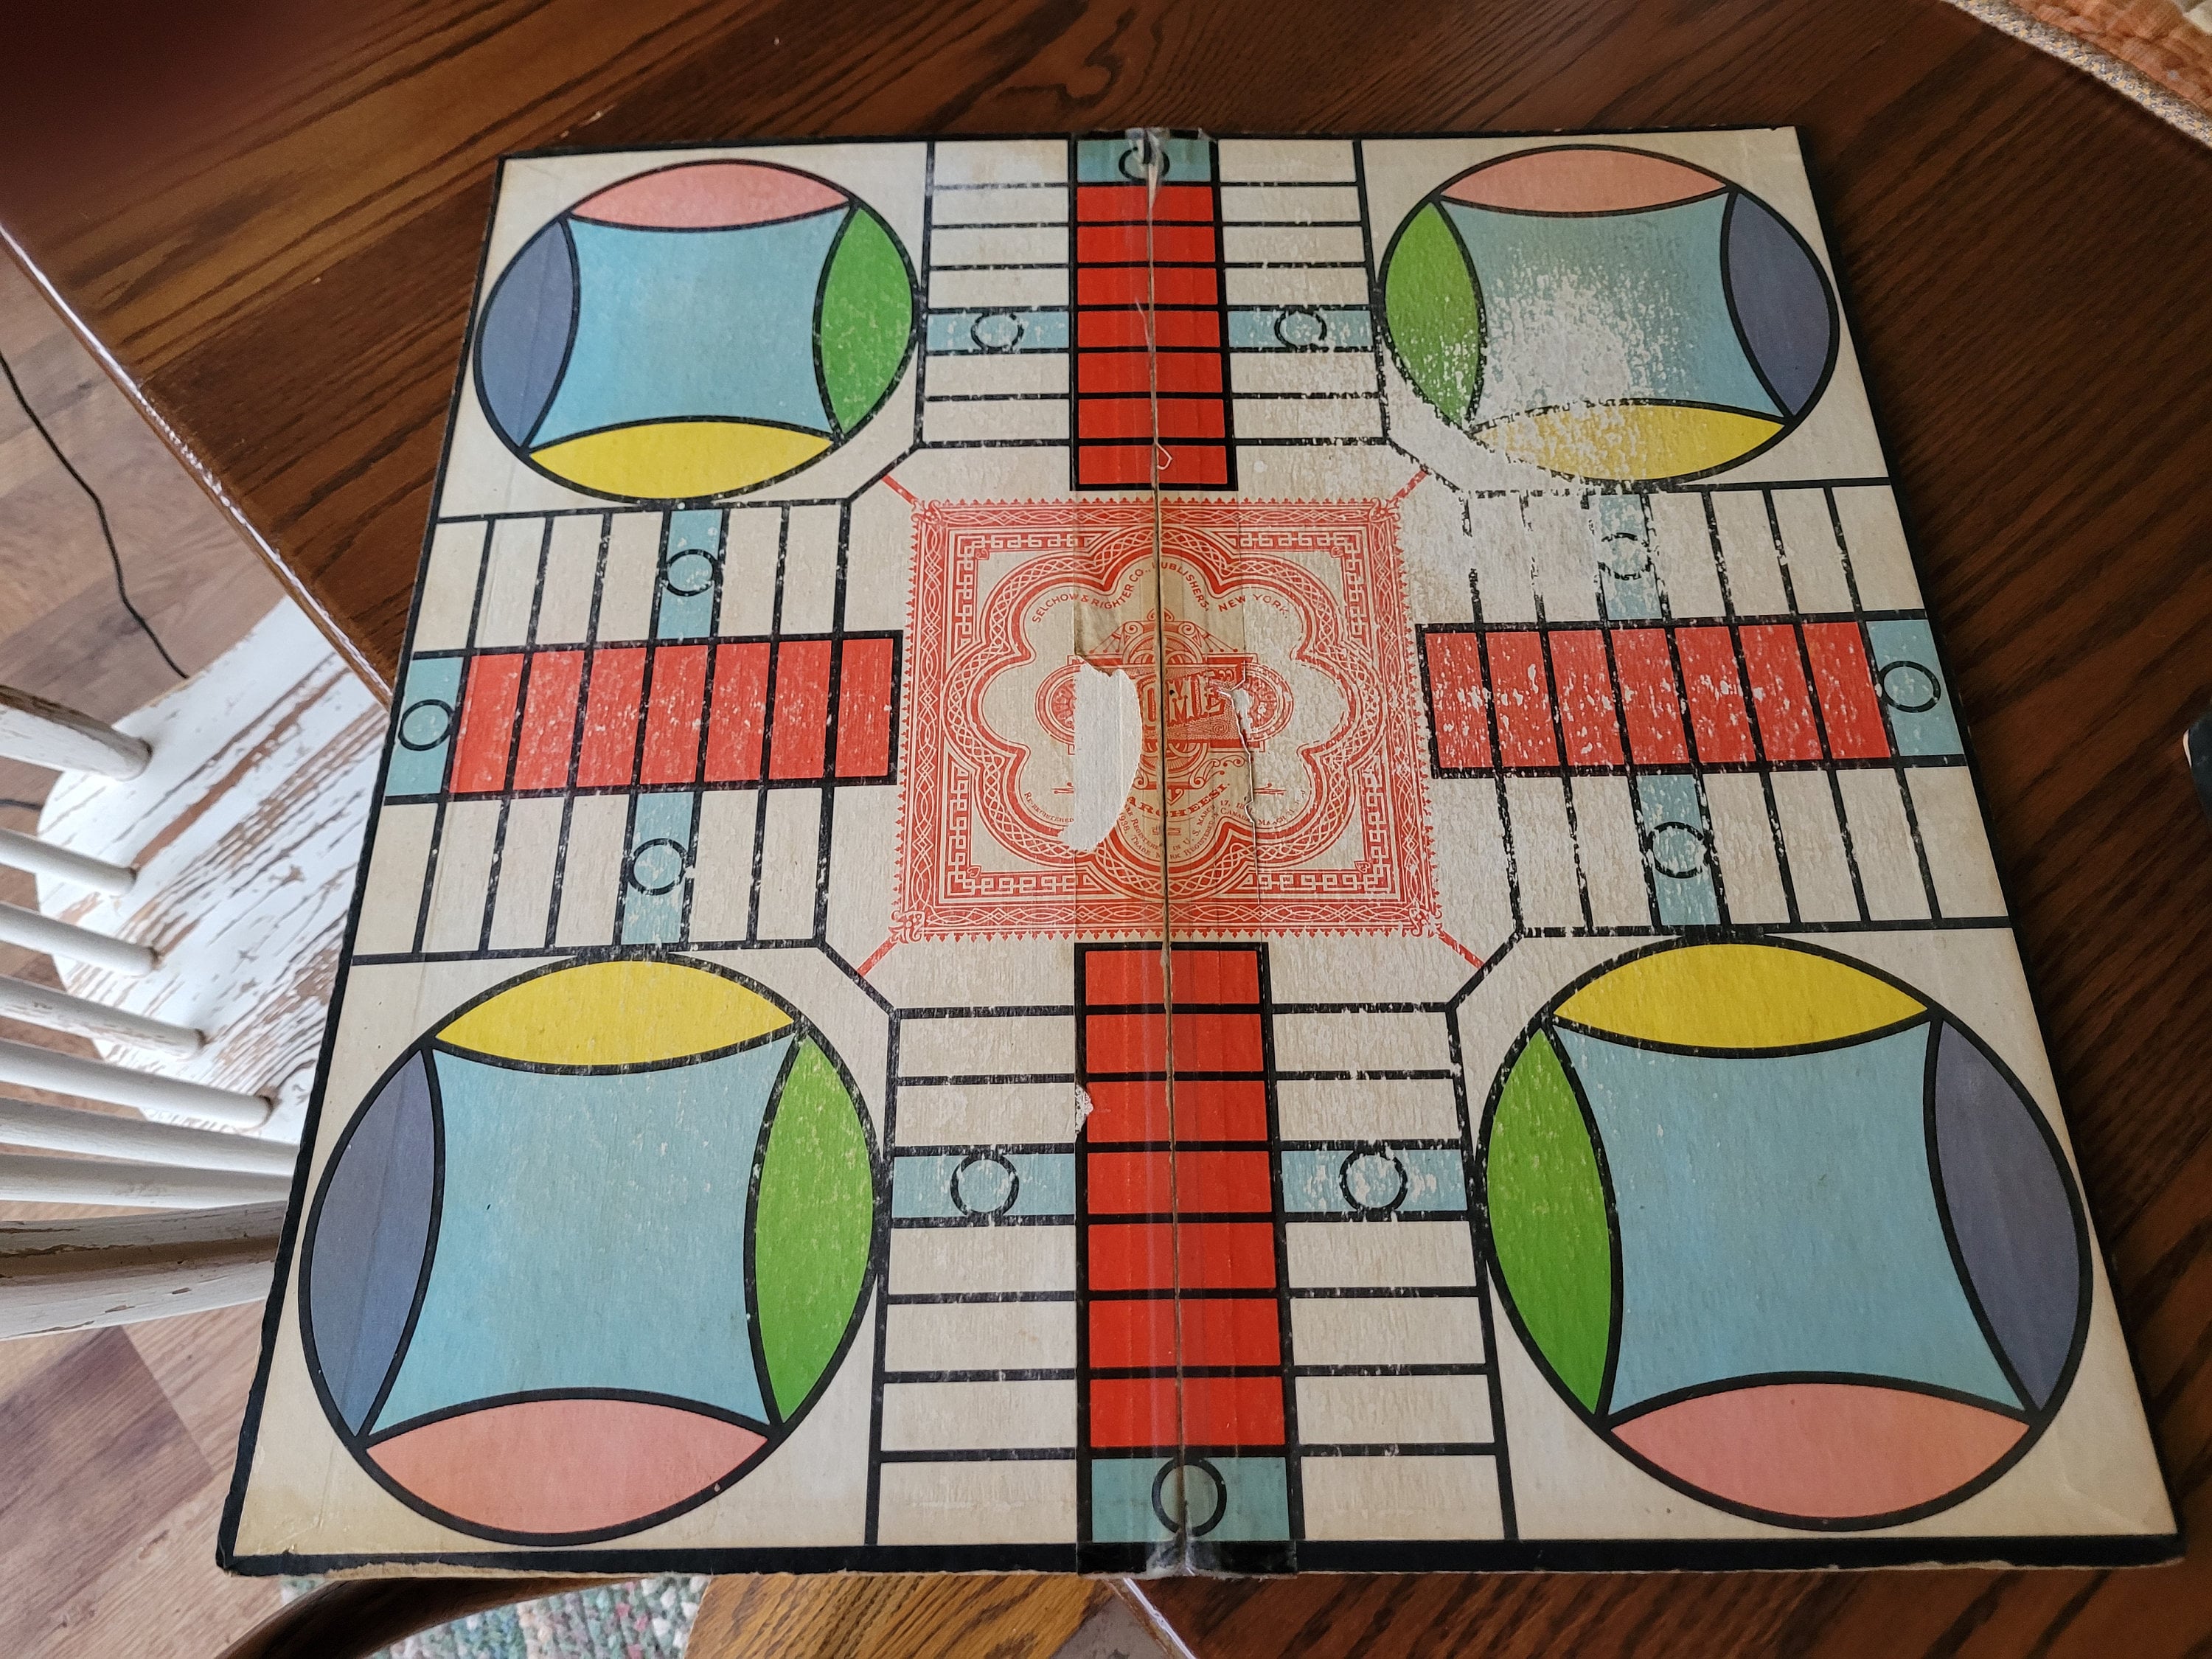 Parchis Board 2 in 1 Parques and chedre and Oca games traditional and  classic Family Club